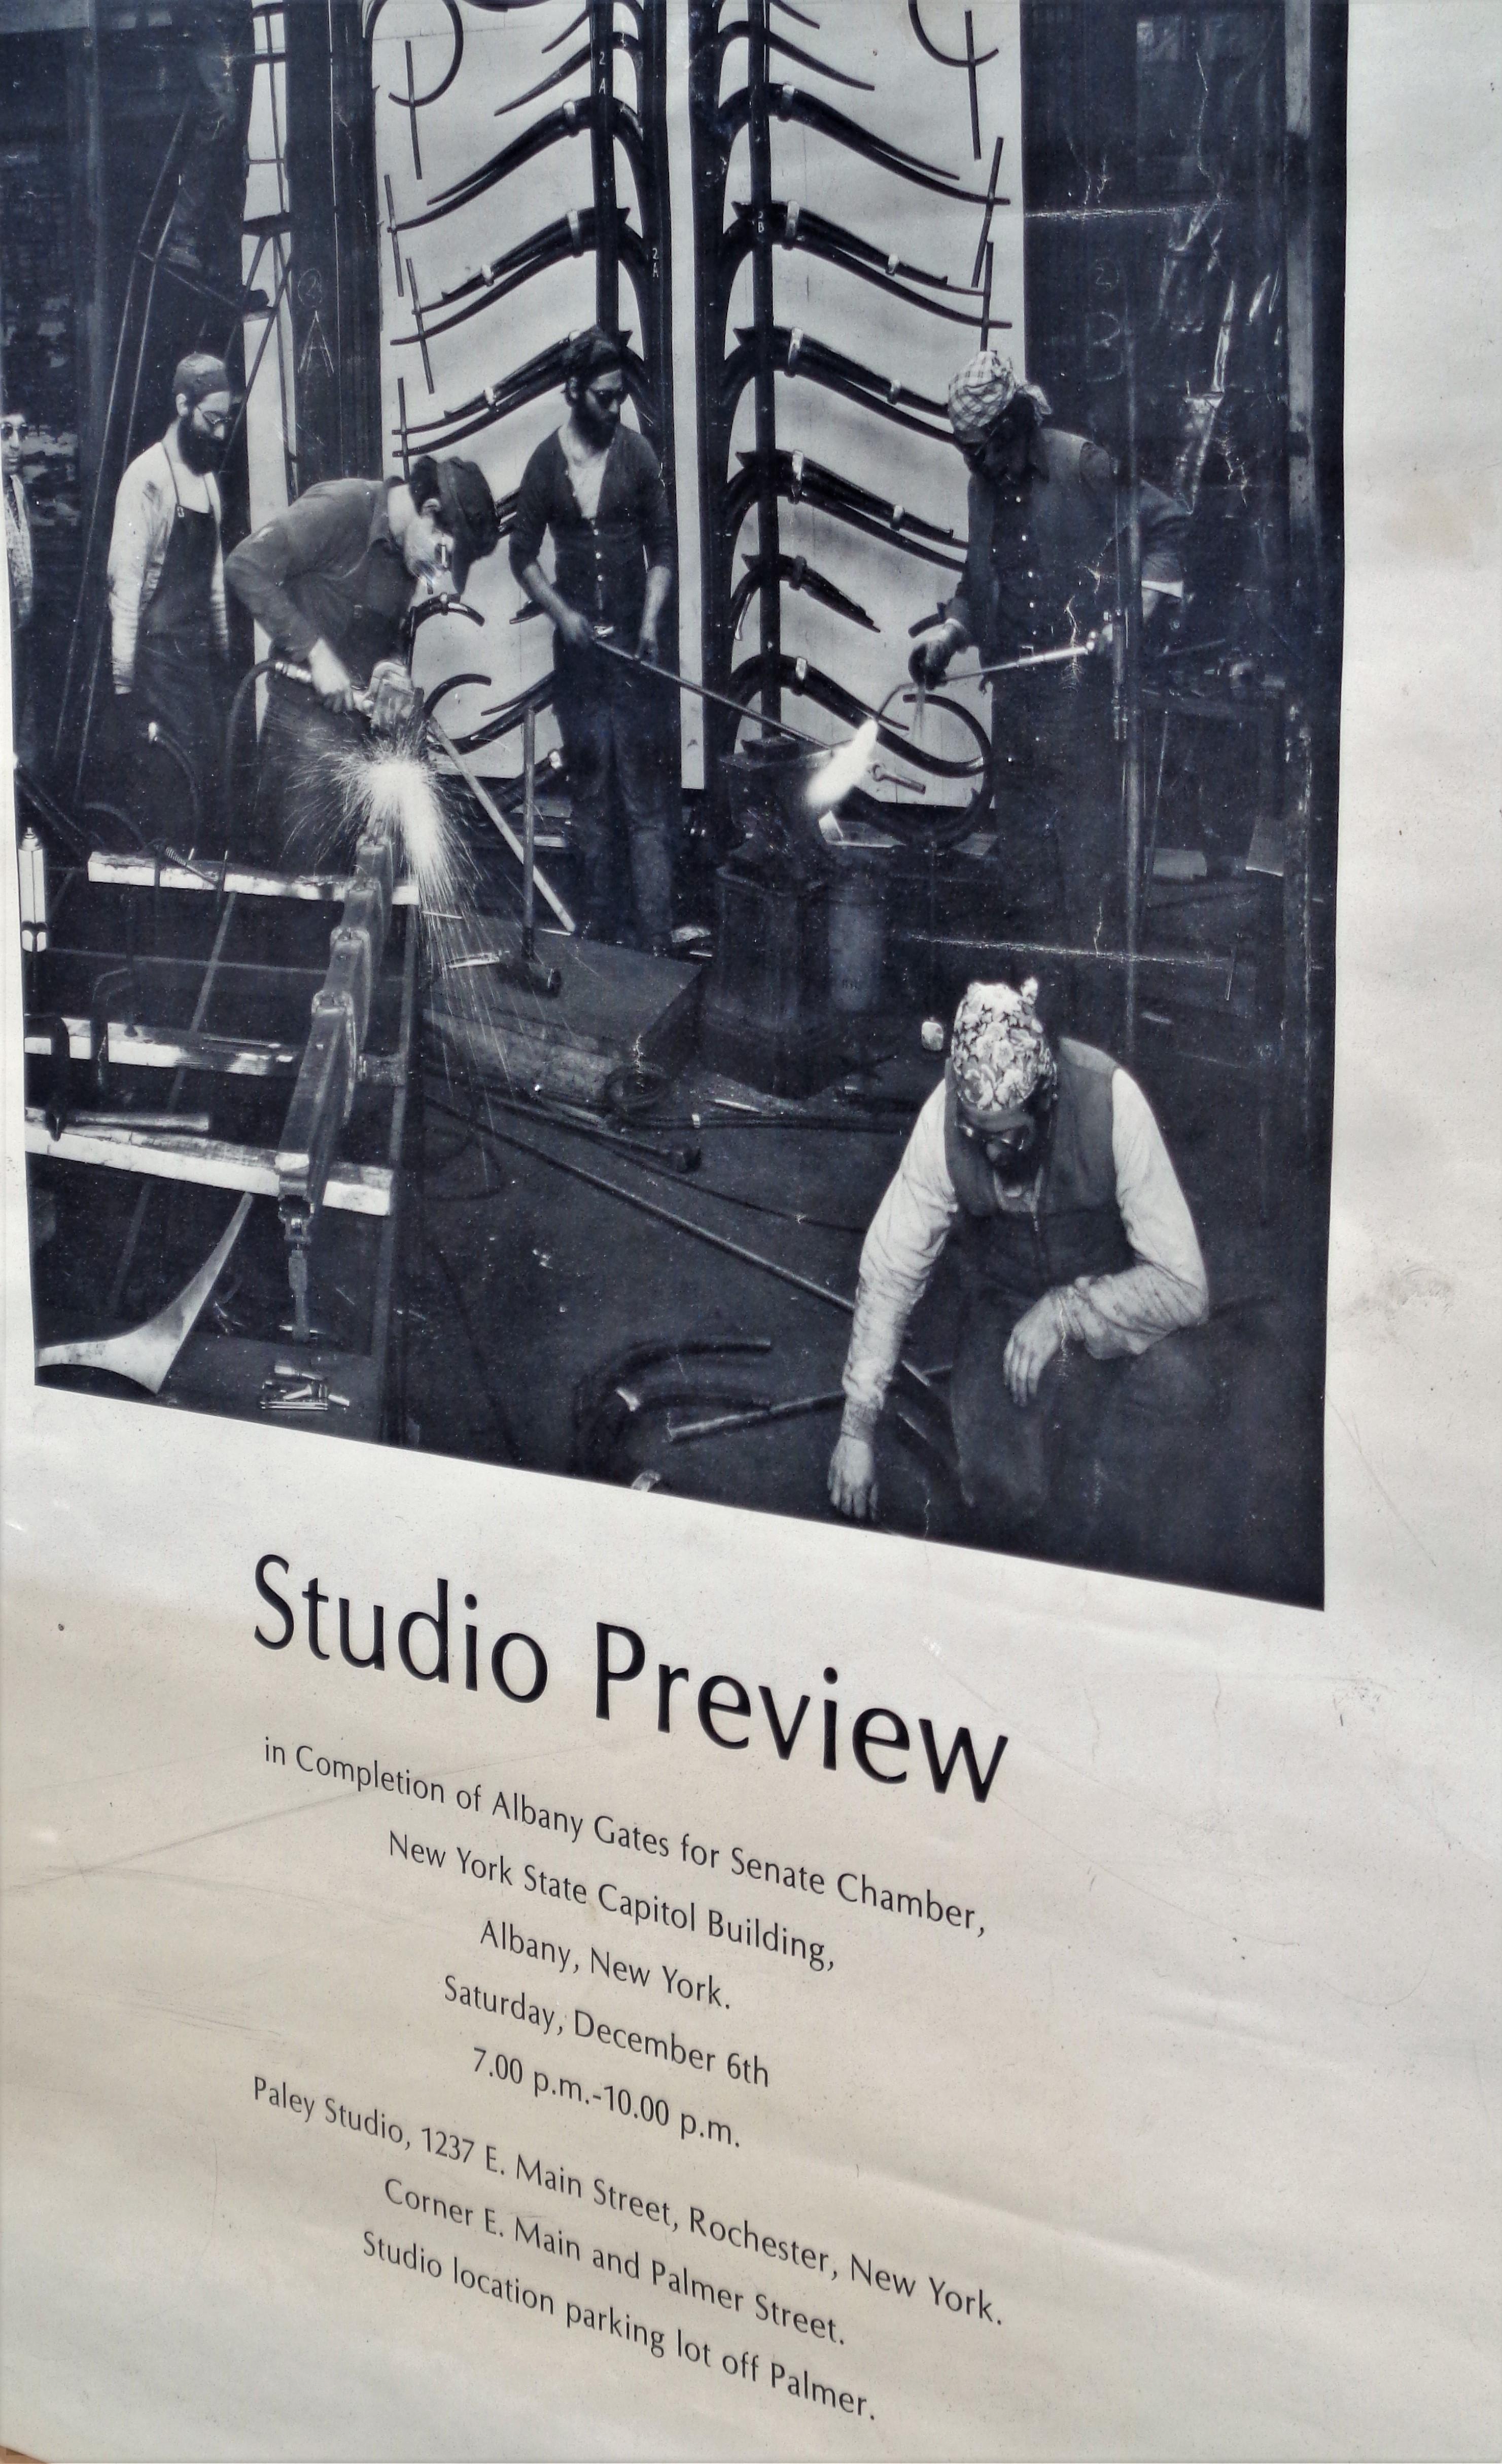 A hard to find early Albert Paley exhibition poster on paper with a striking industrial style photographic image of Albert and his team using blow torches while constructing the Albany gates for the Senate Chamber, New York State Capitol Building,